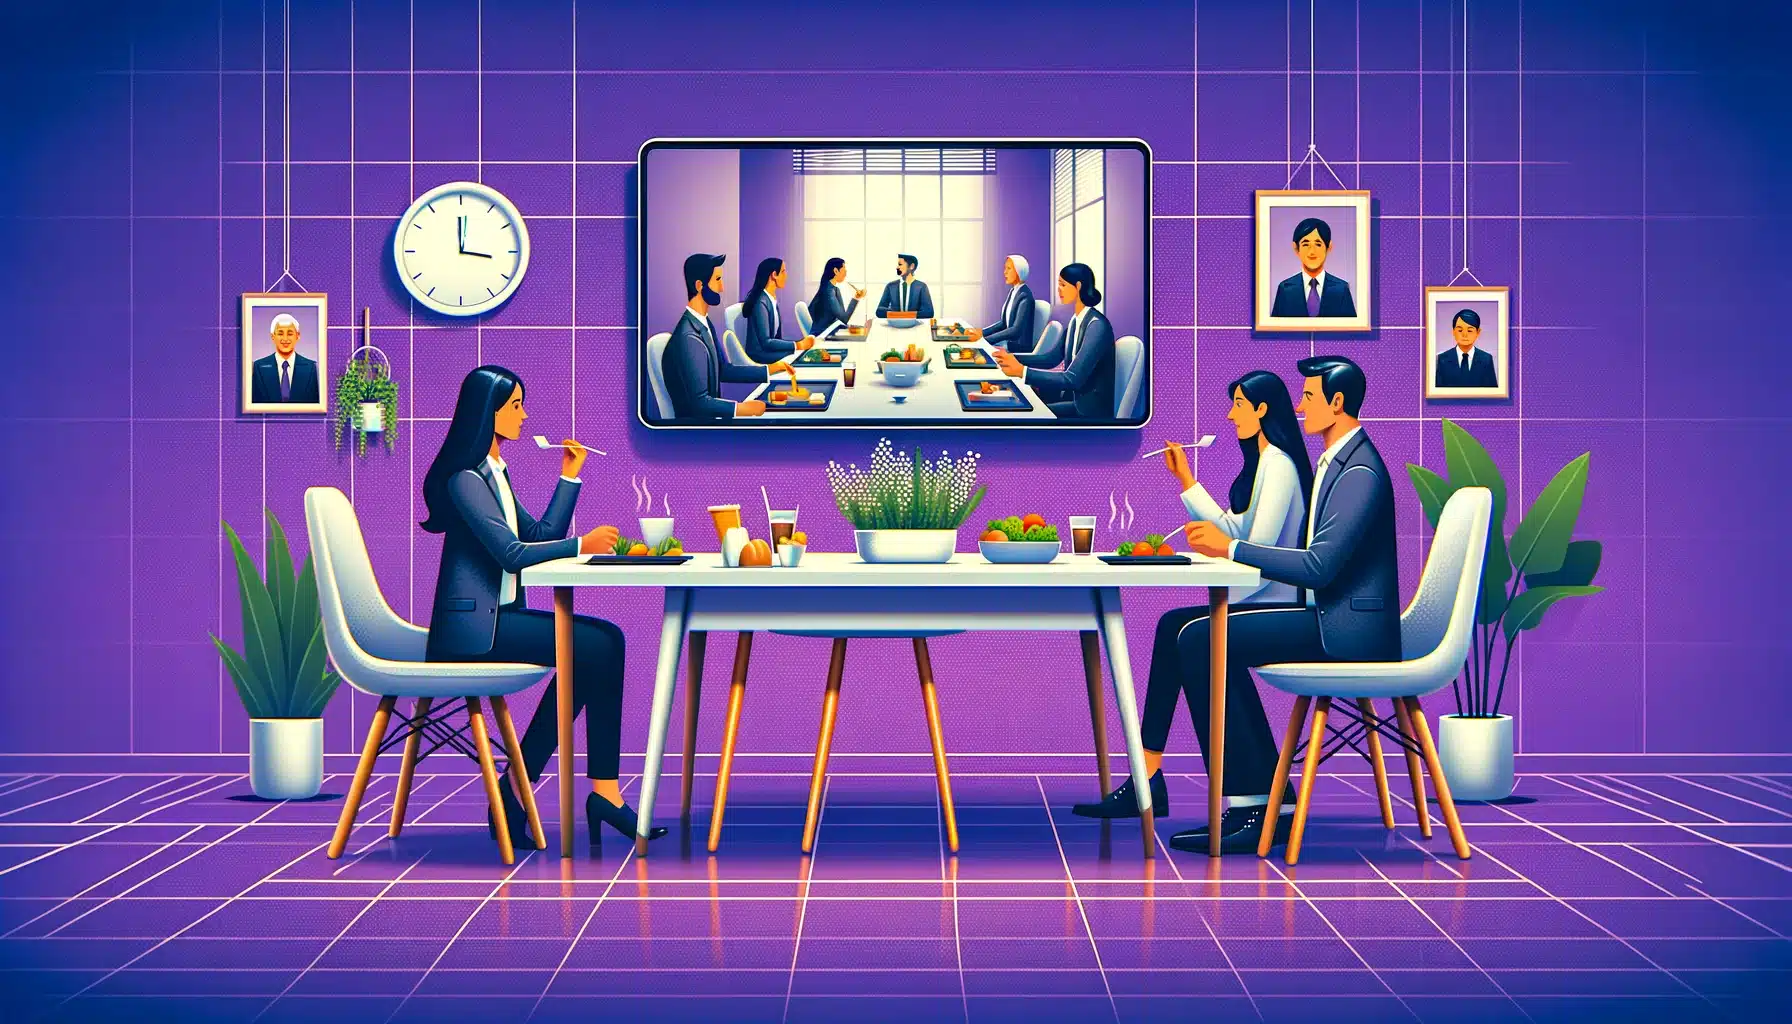 Lunch-At-the-Office-Reinventing-the-Lunchtime-Connection-A-16_9-image-with-a-purple-background-featuring-a-modern-office-lunch-scene.-The-scene-includes-colleagues-sitting-together-at-a-stylish-lunch-table